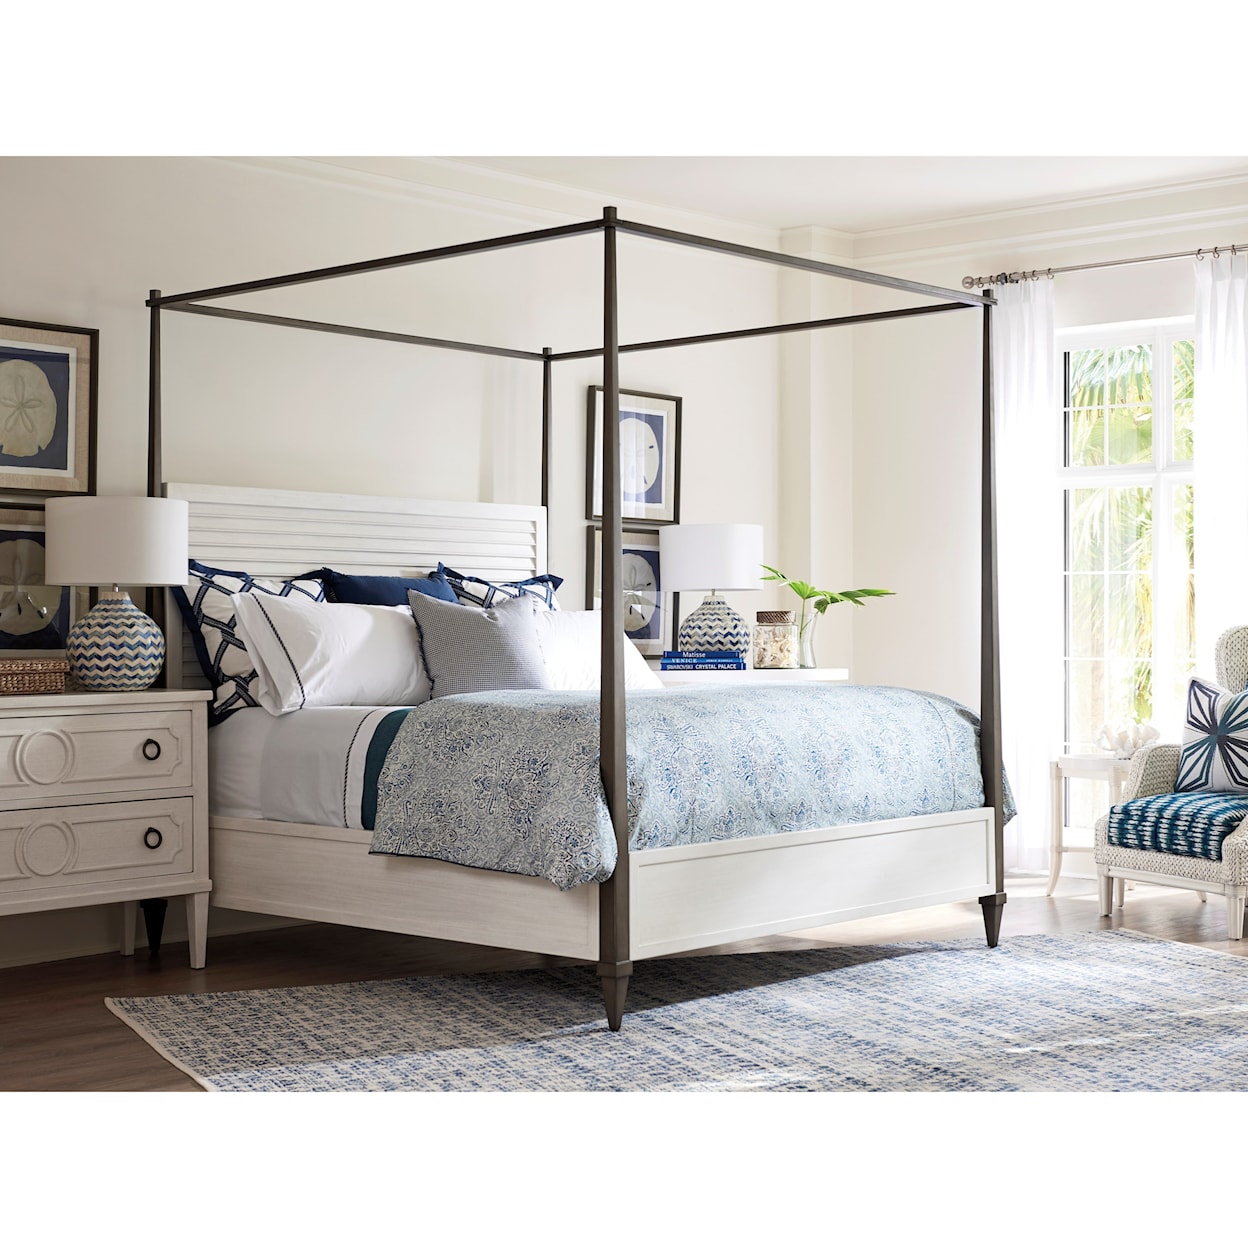 Tommy Bahama Home Ocean Breeze Coral Gables Poster Bed King